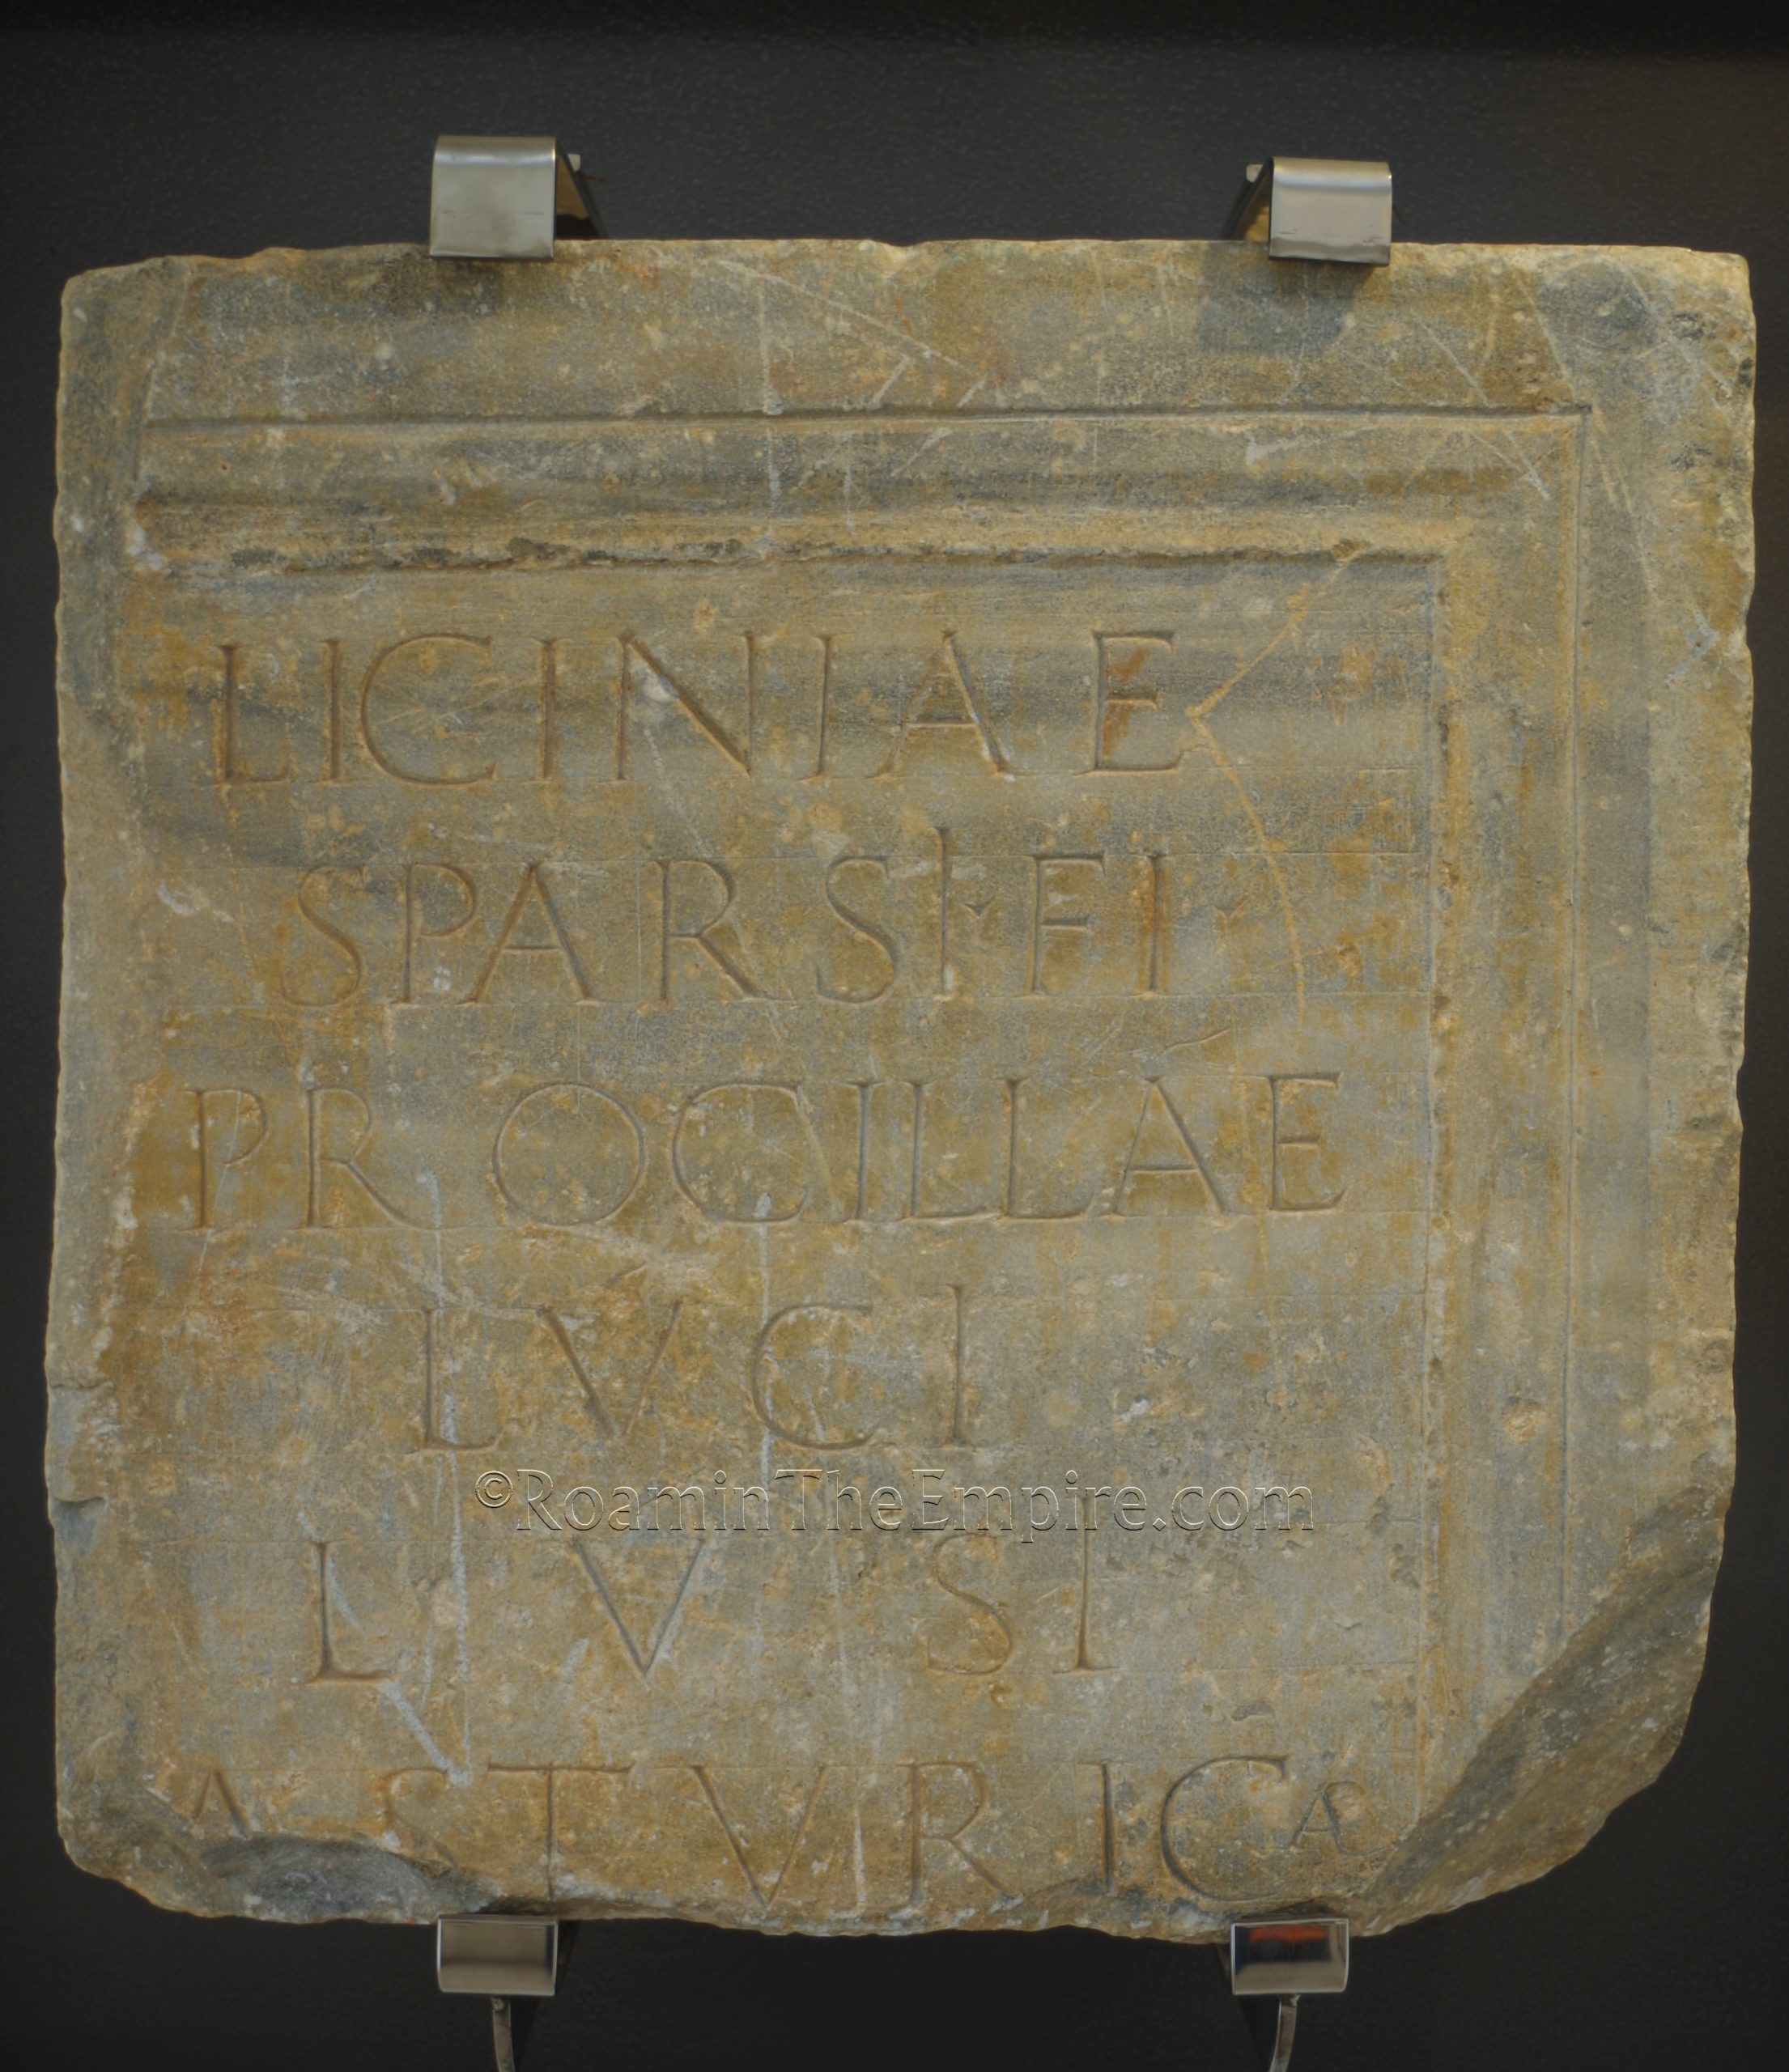 Funerary inscription of Licinia Procila, daughter of Sparsus. The monument was erected by Lucius Lusio and mentions the name of Asturica. Dated to the 2nd century CE. Museo Romano La Ergastula.